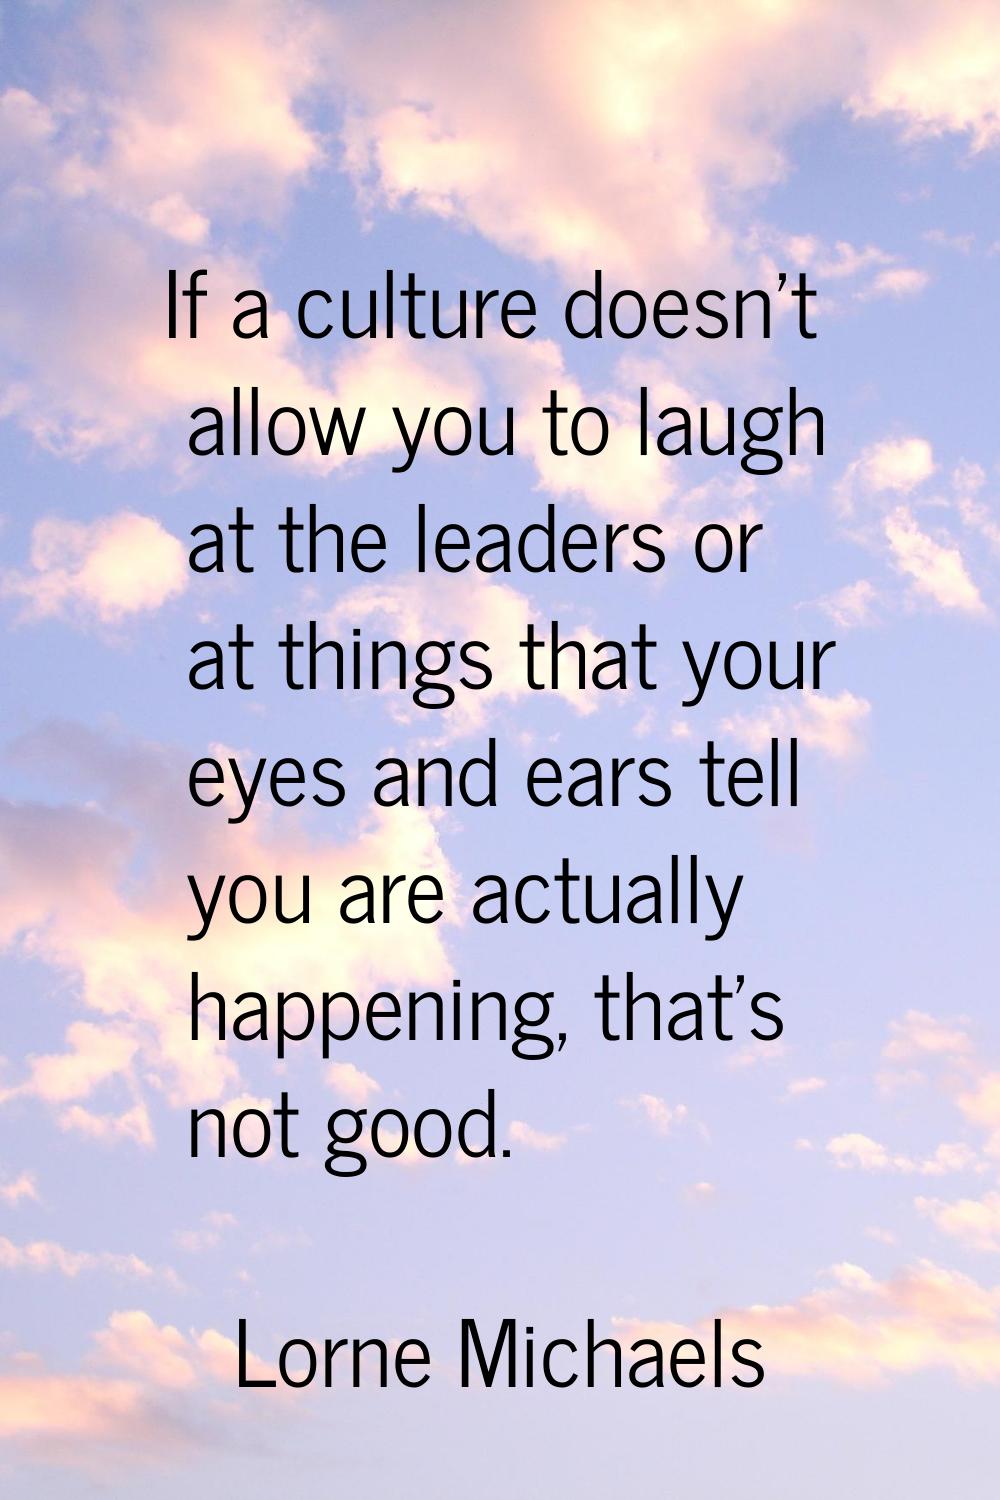 If a culture doesn't allow you to laugh at the leaders or at things that your eyes and ears tell yo